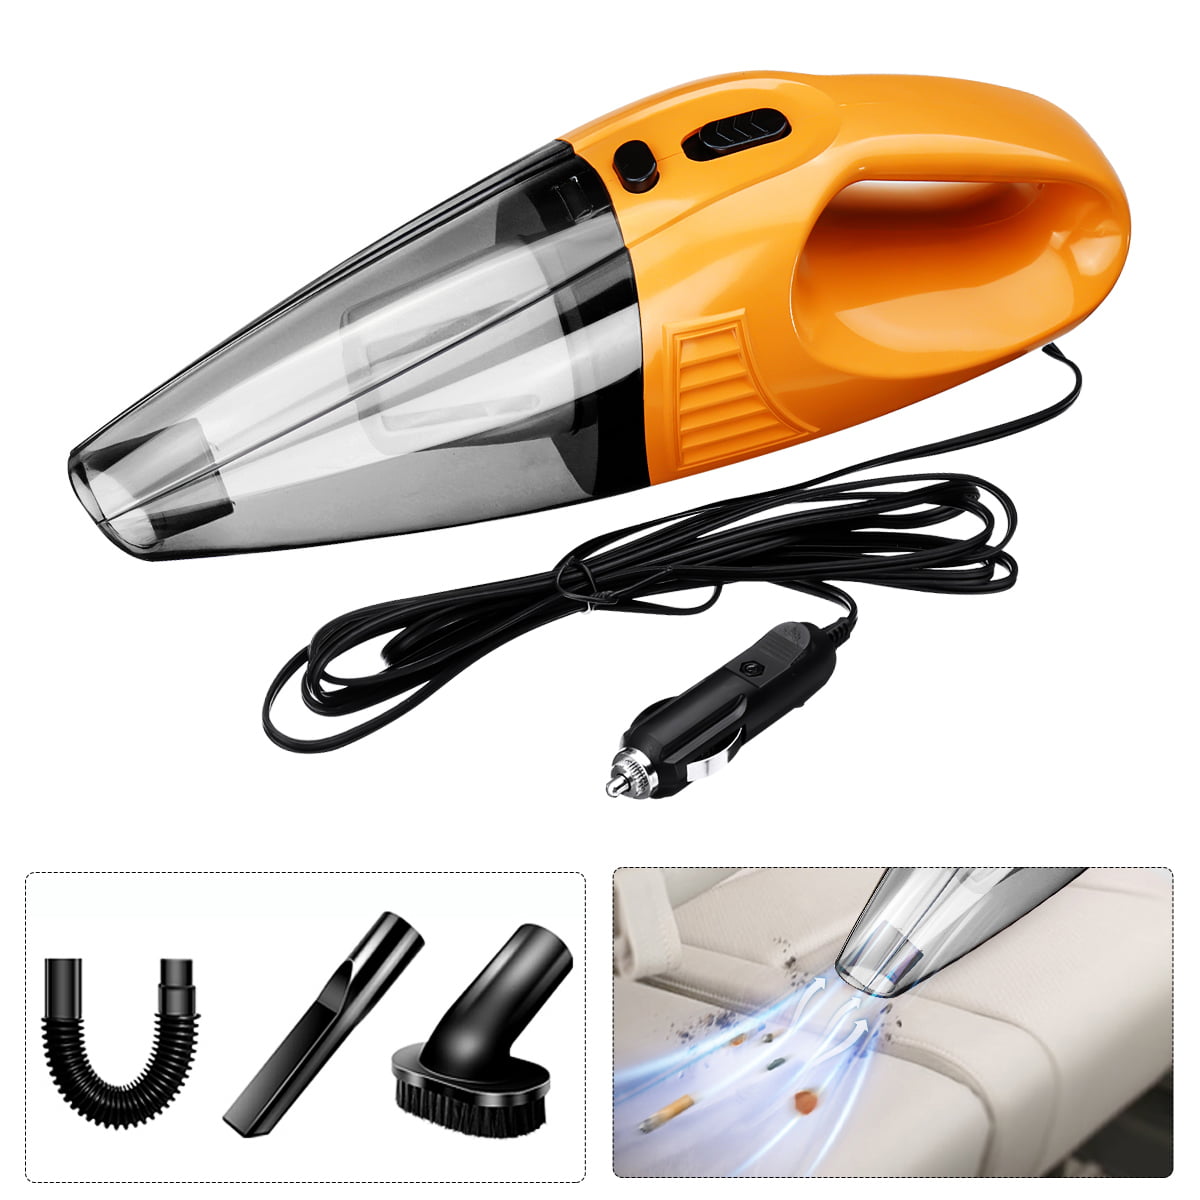 Dudubuy Mini Portable Car Vacuum Cleaner W/Led Light 15 Foot Cable 12V with Accessories Kit for Powerful Cleaning Detailing and Car Interior Black 